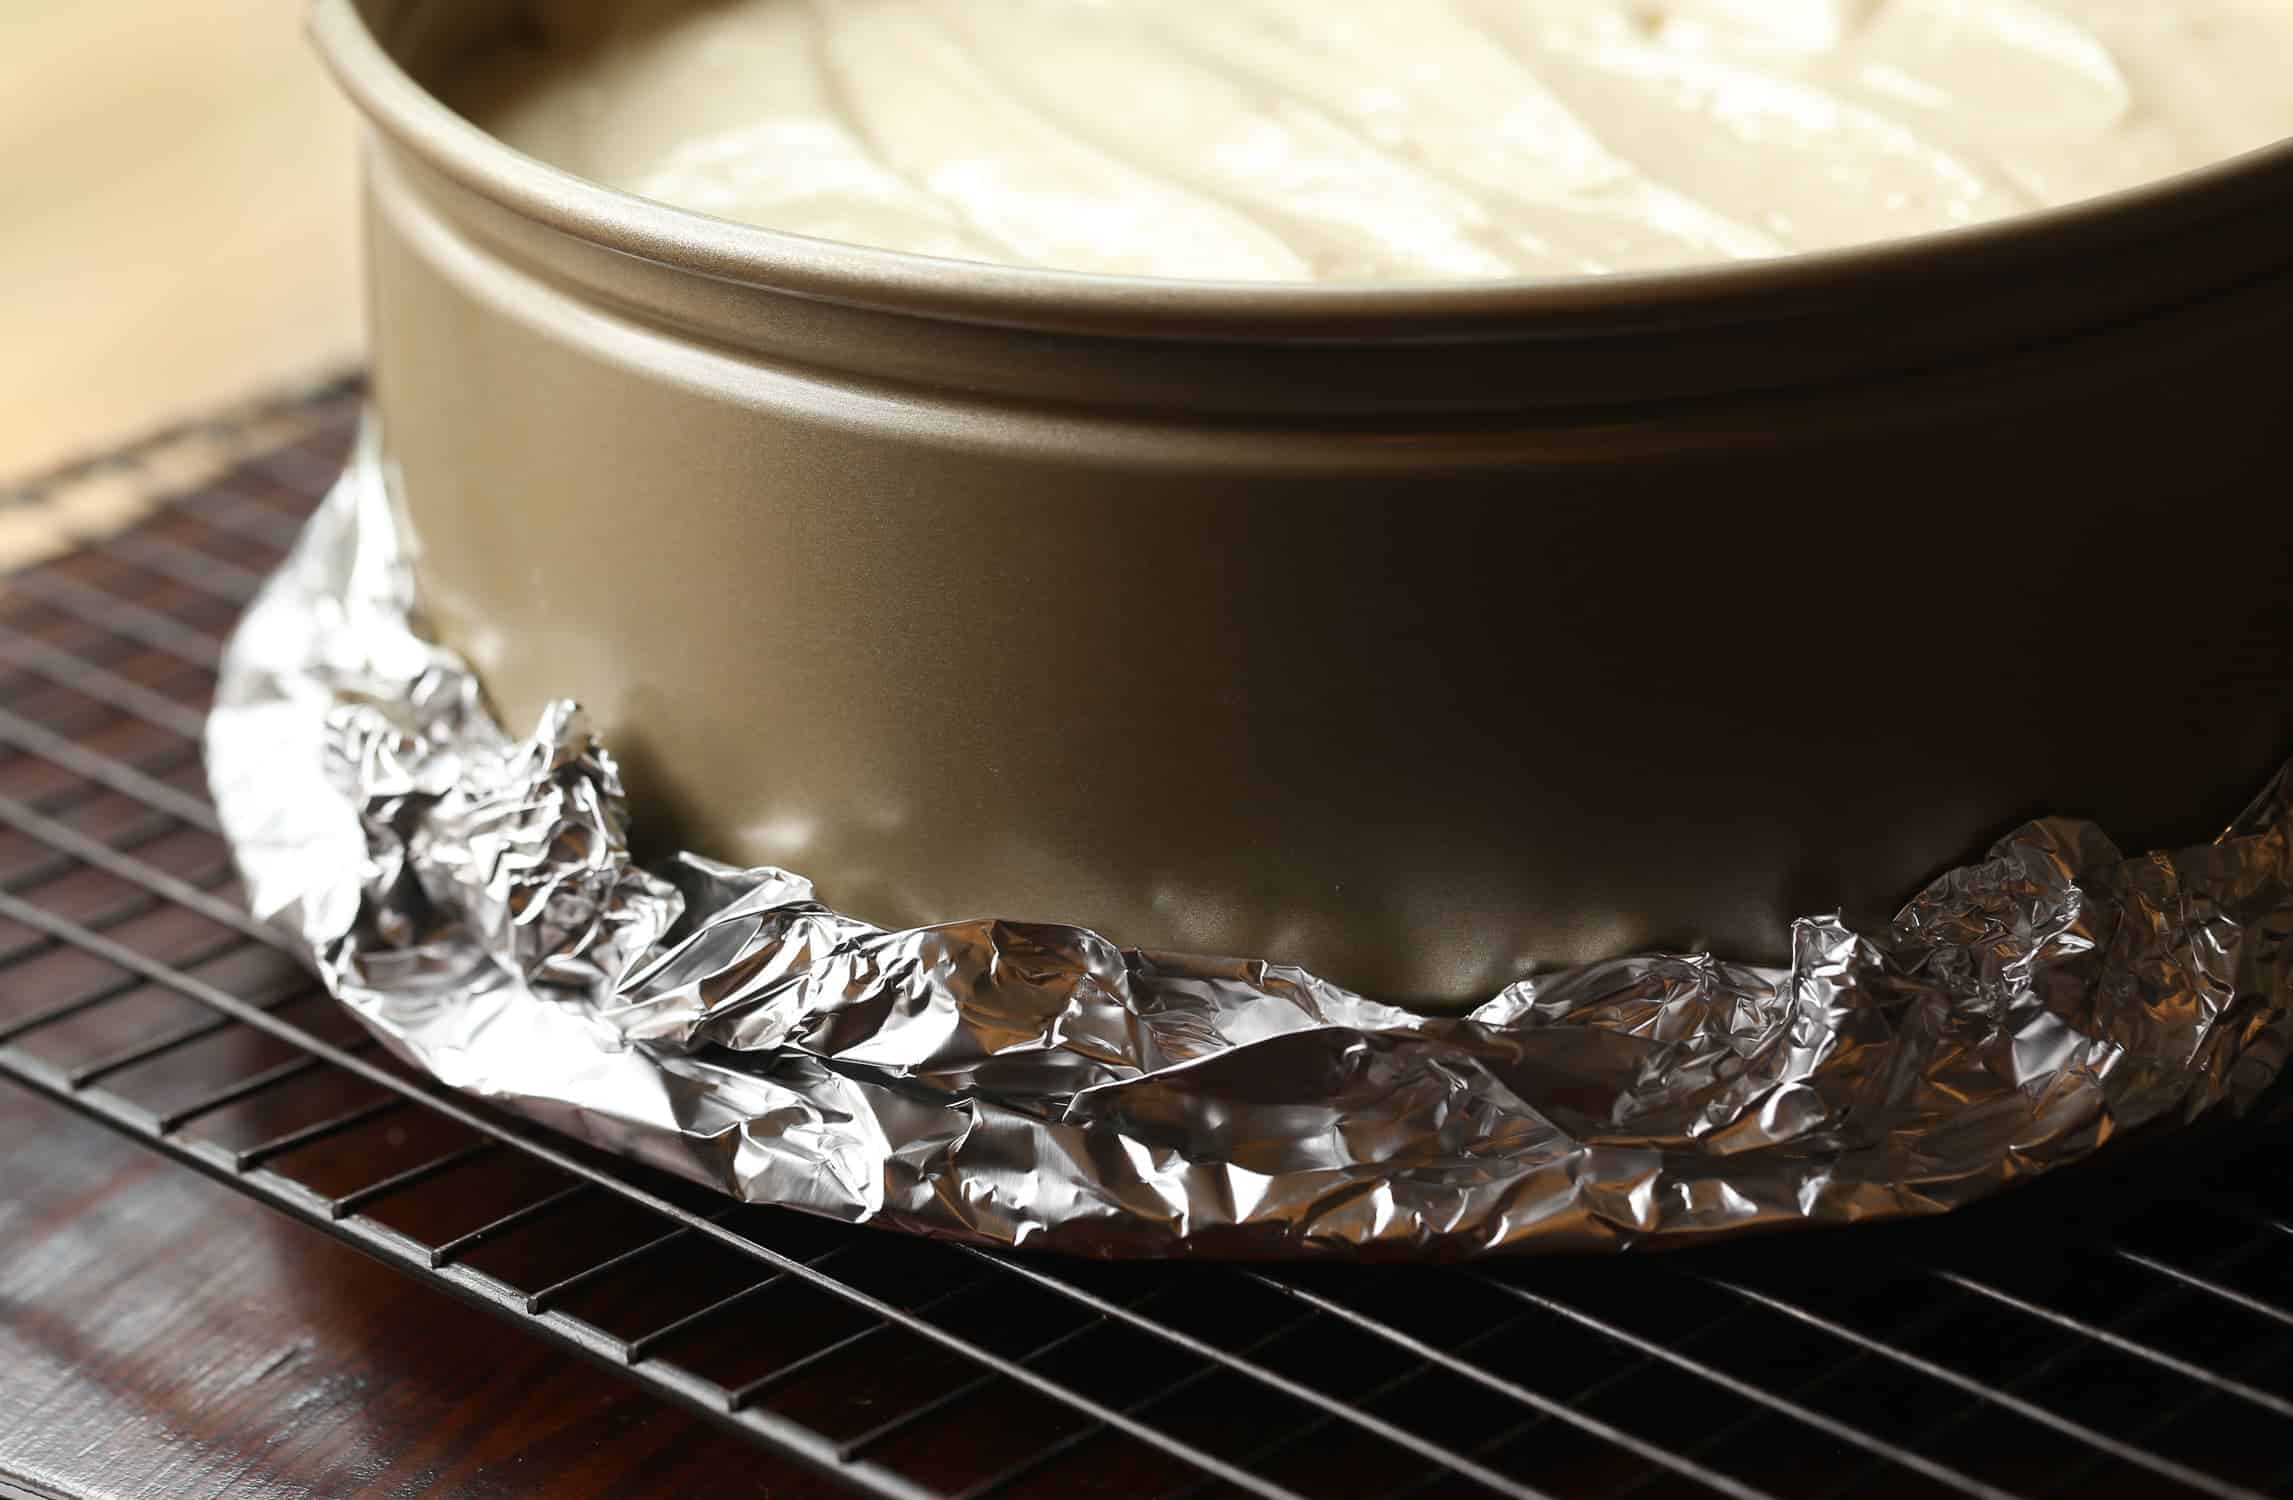 Cheesecake in a springform pan wrapped with tin foil.